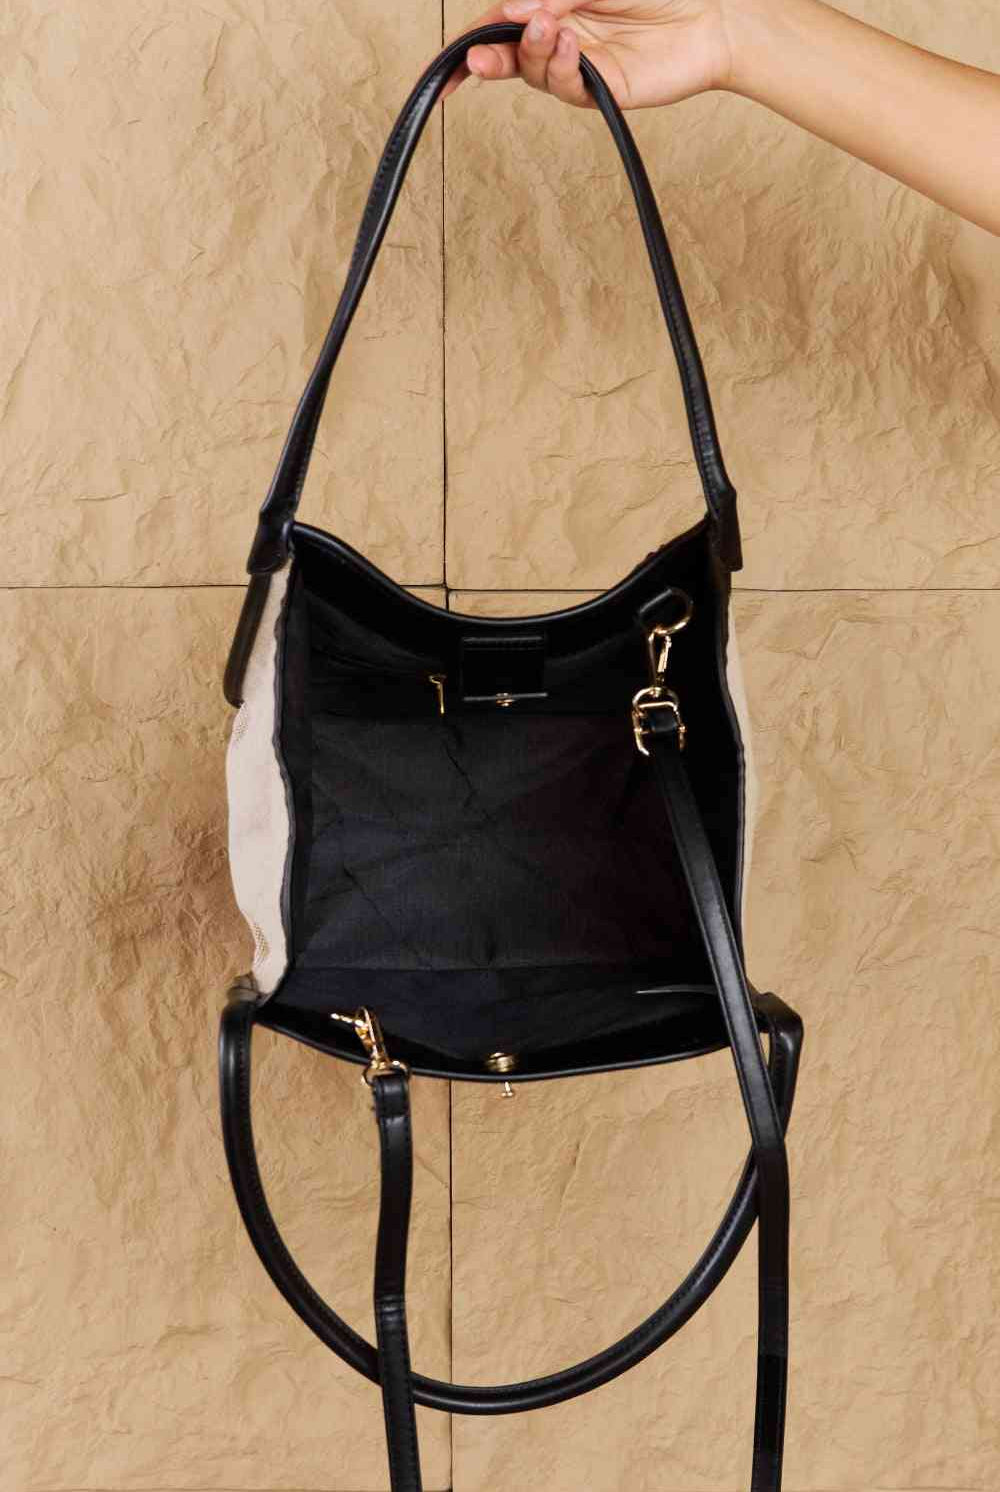 Fame Beach Chic Faux Leather Trim Tote Bag in Black - GemThreads Boutique